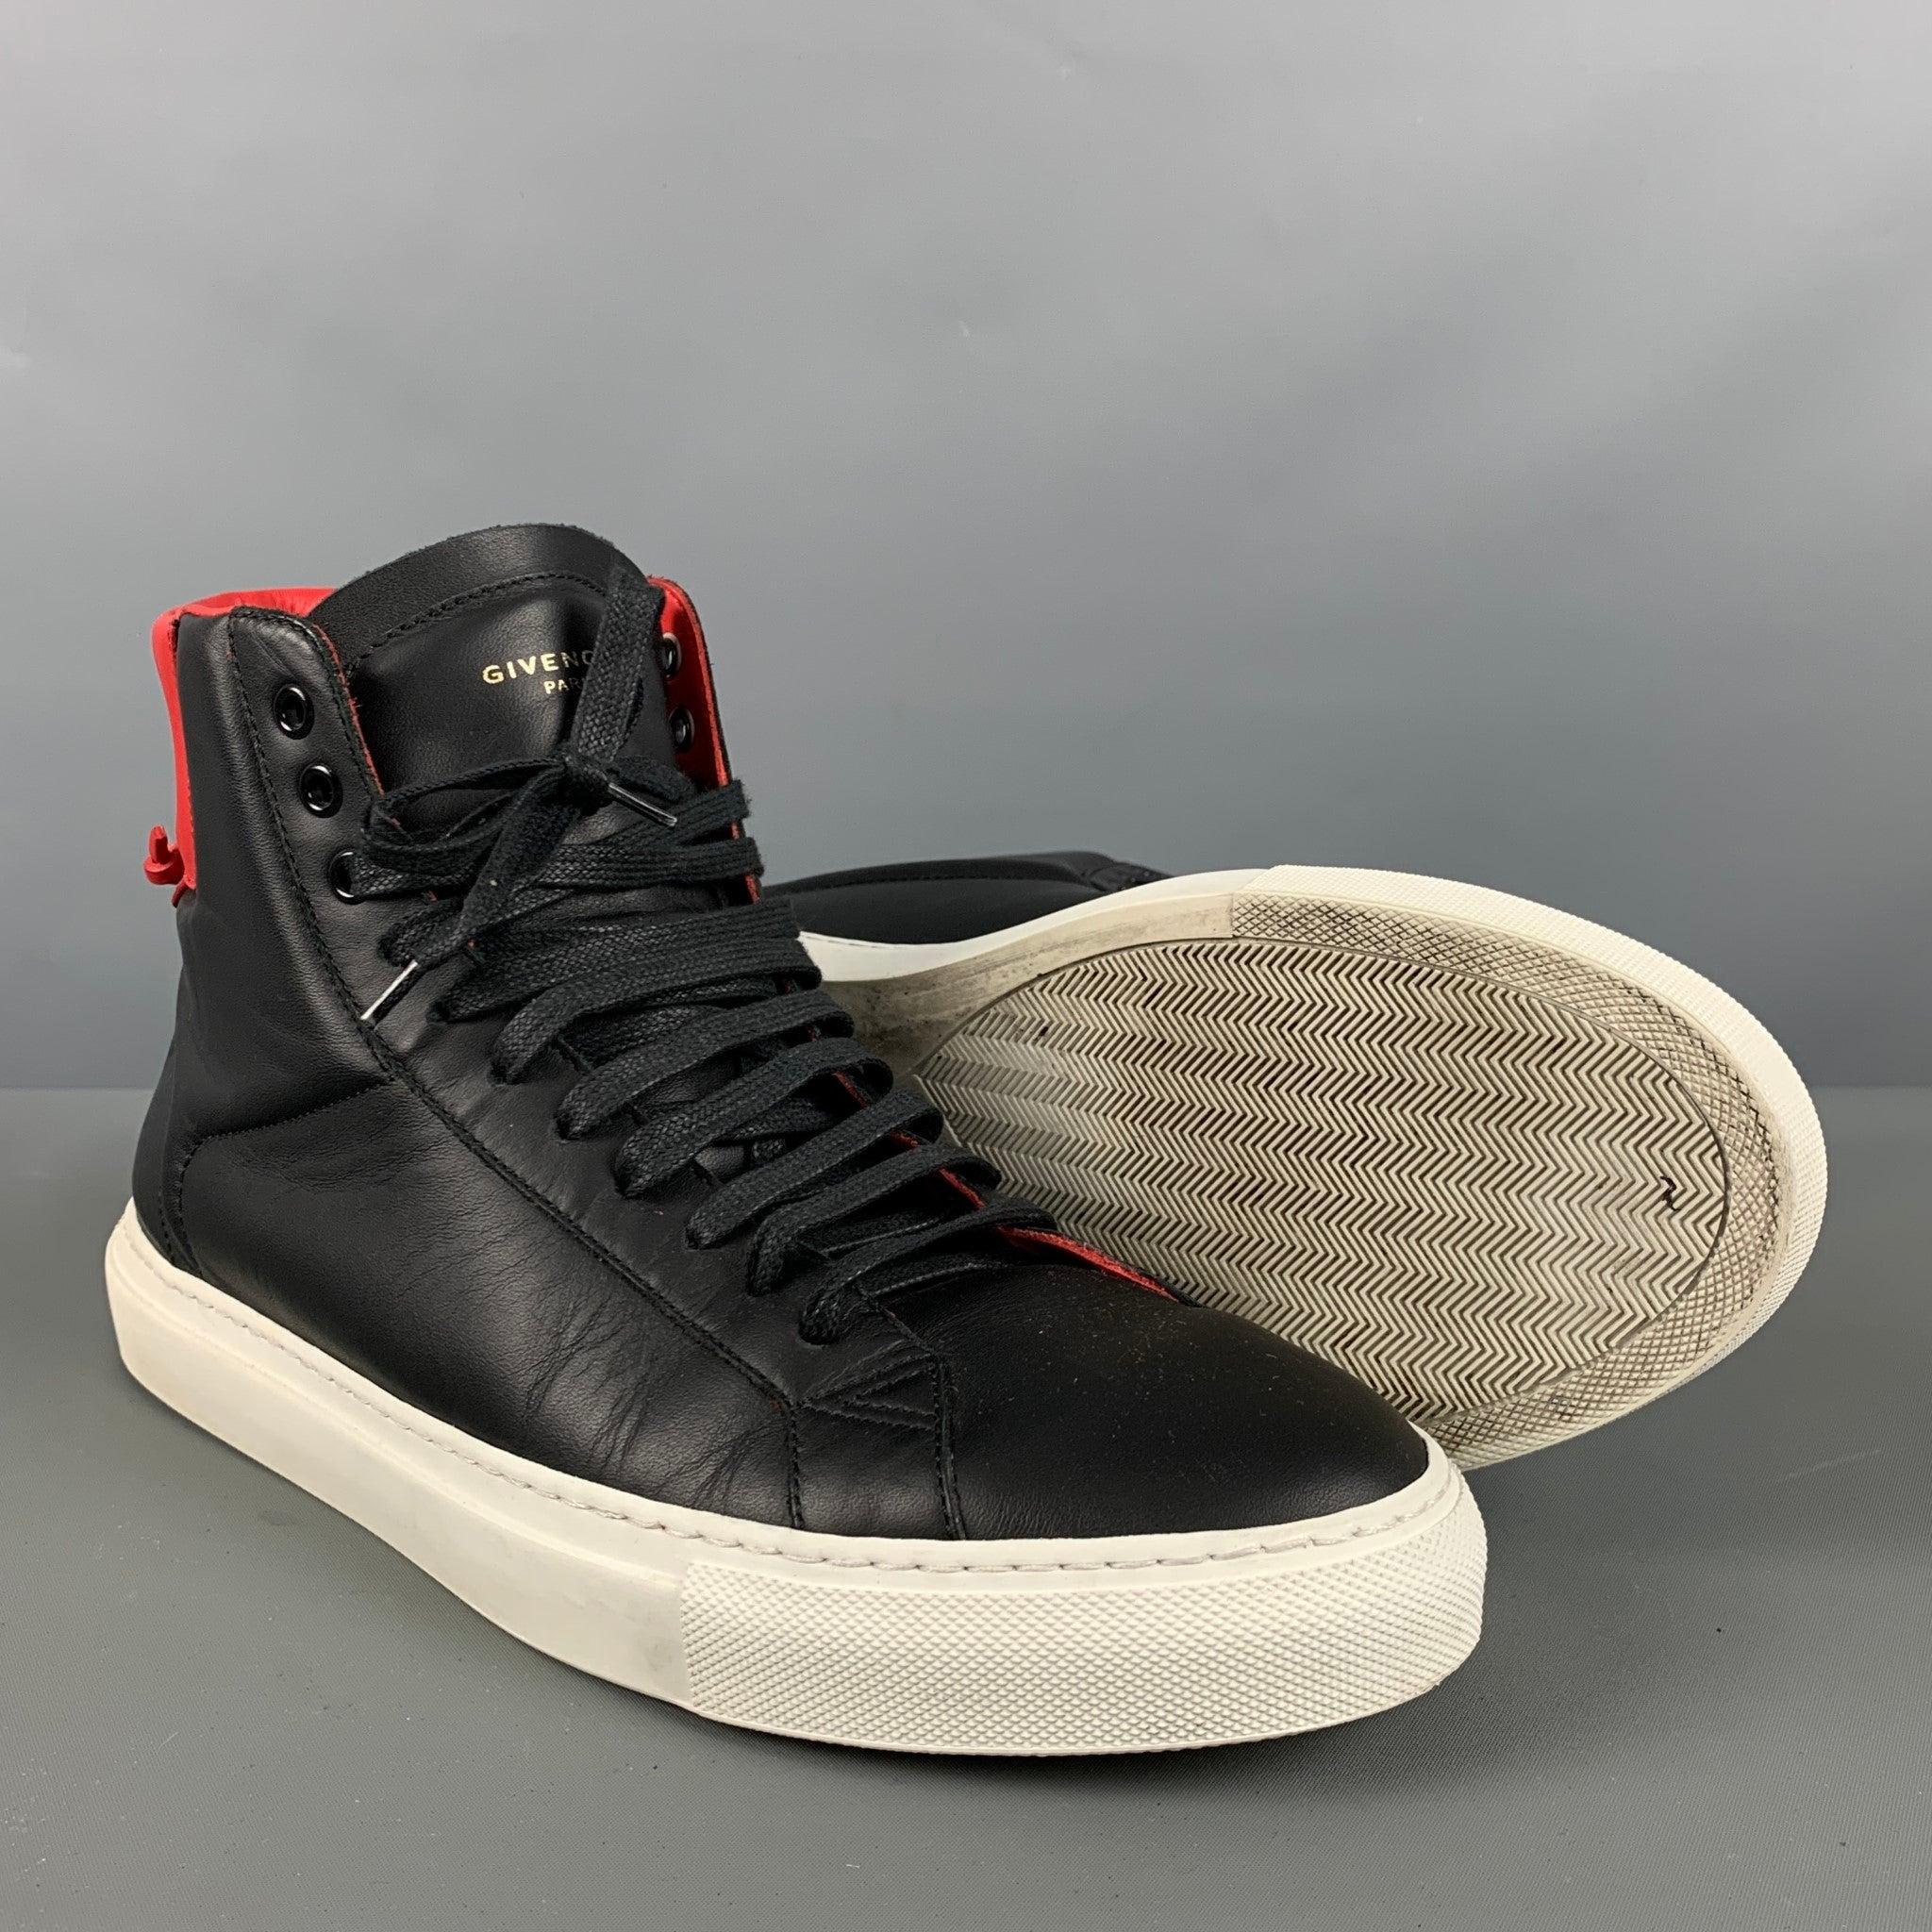 GIVENCHY Size 10 Black Red & White Color Block Leather High Top Sneakers 1